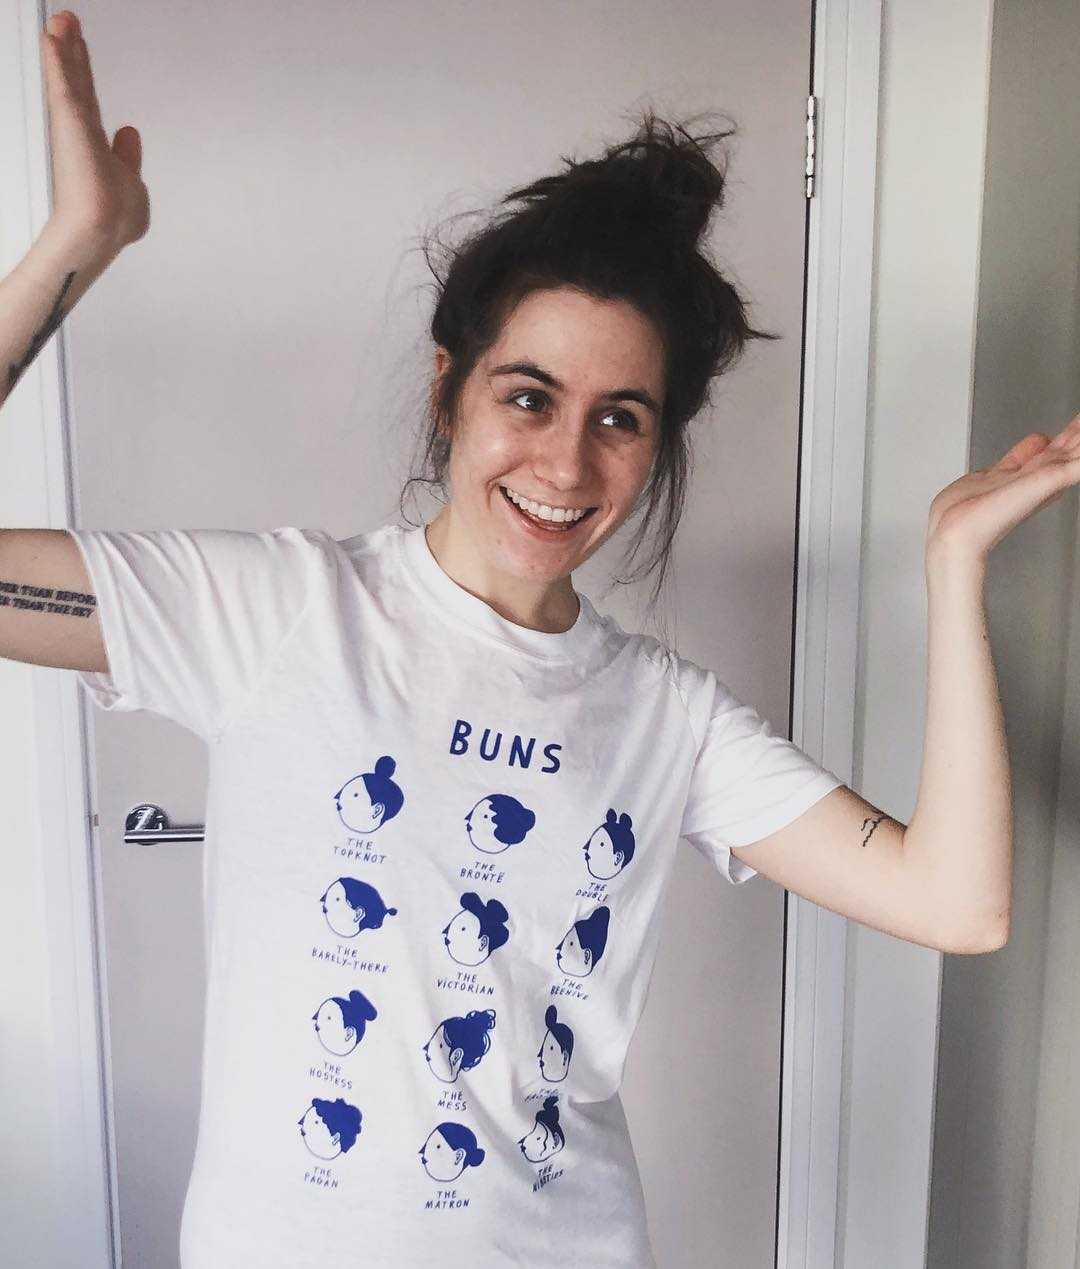 51 Hottest Dodie Big Butt Pictures Demonstrate That She Has Most Sweltering Legs 608